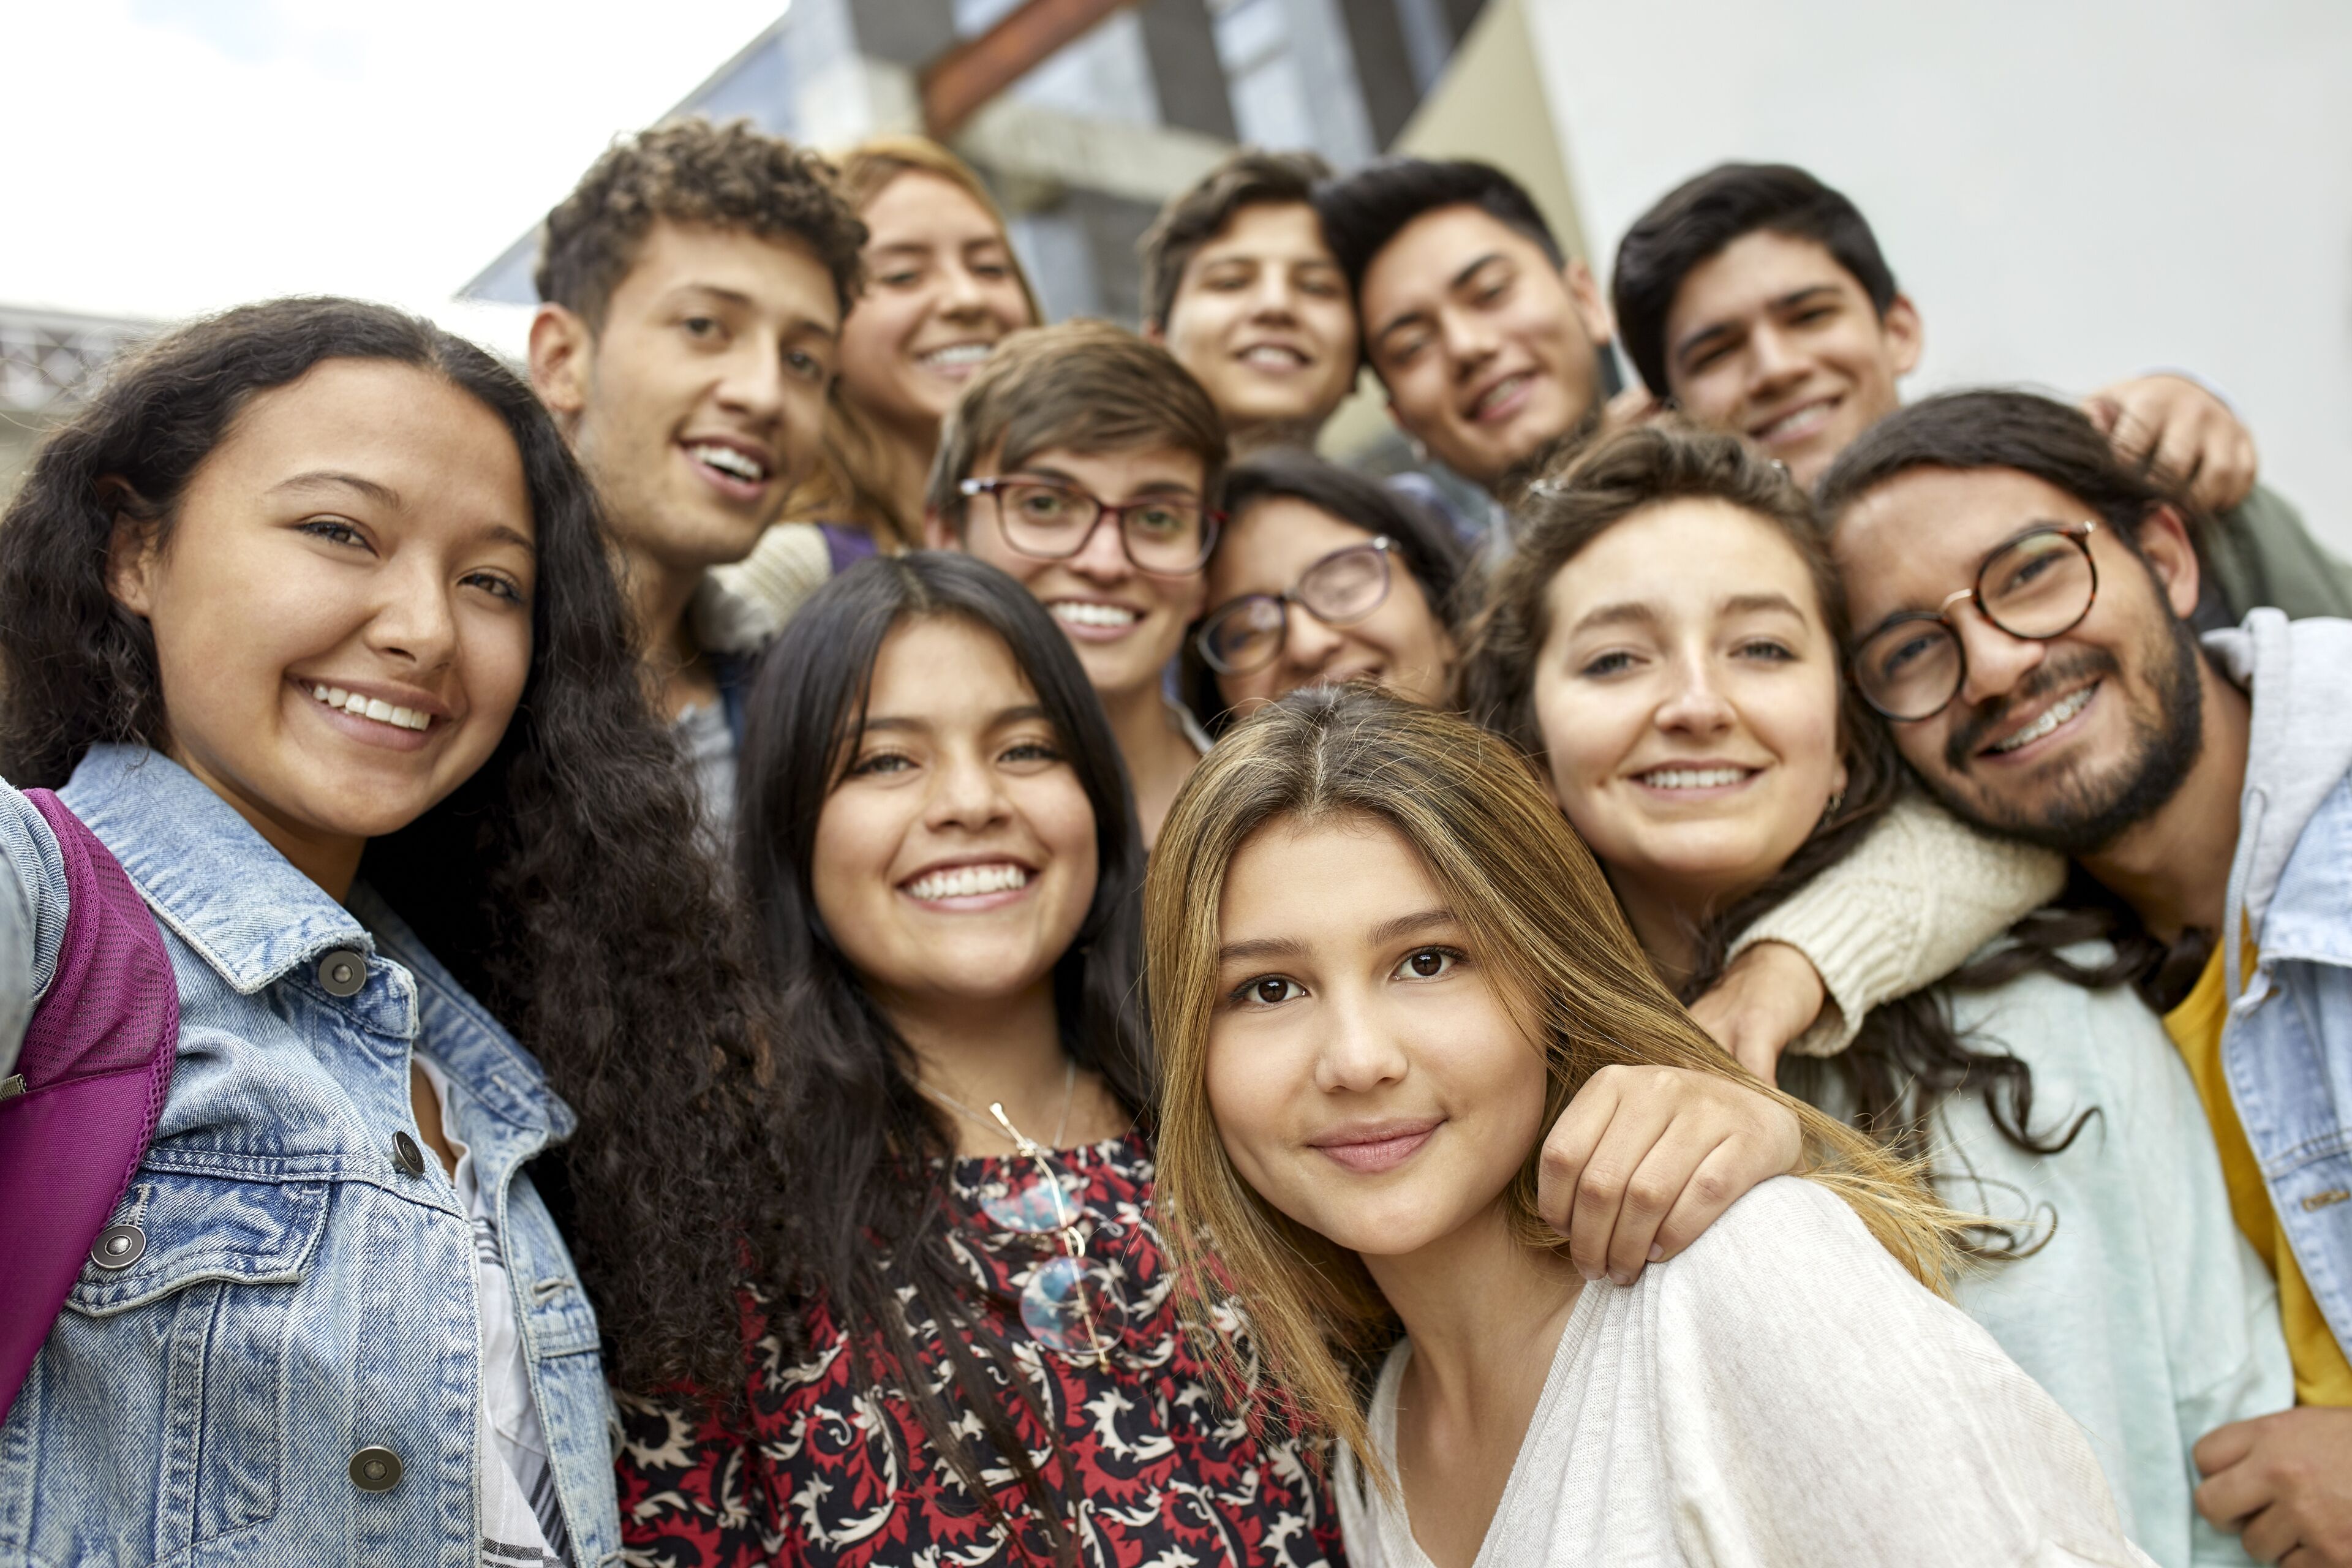 A cheerful group of diverse students posing together for a close-up selfie.